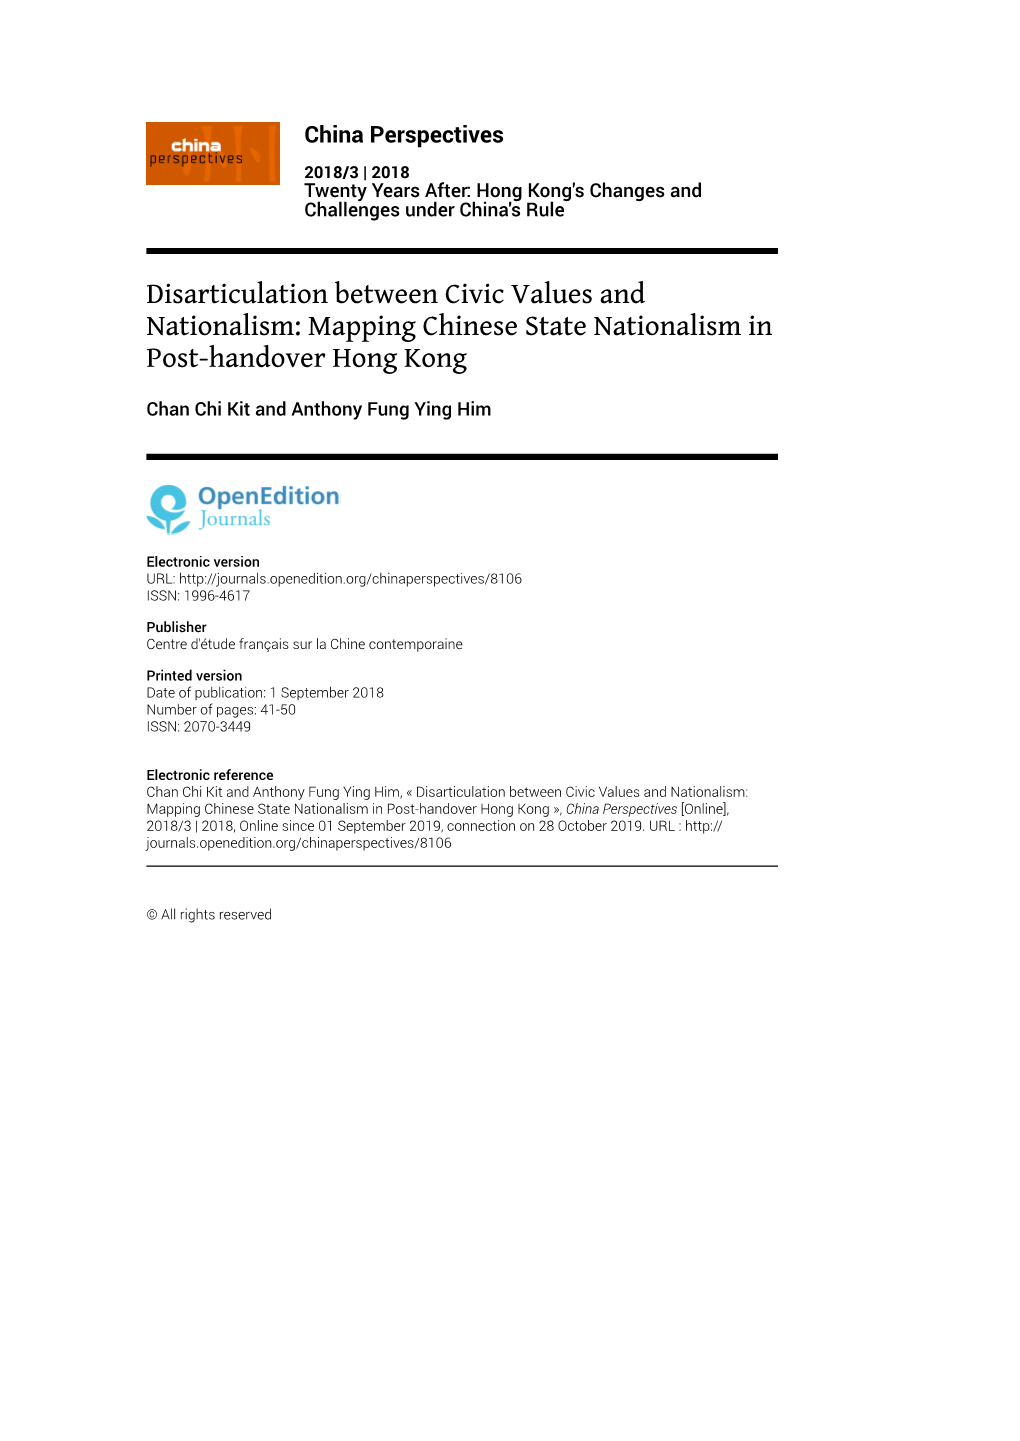 Disarticulation Between Civic Values and Nationalism: Mapping Chinese State Nationalism in Post-Handover Hong Kong